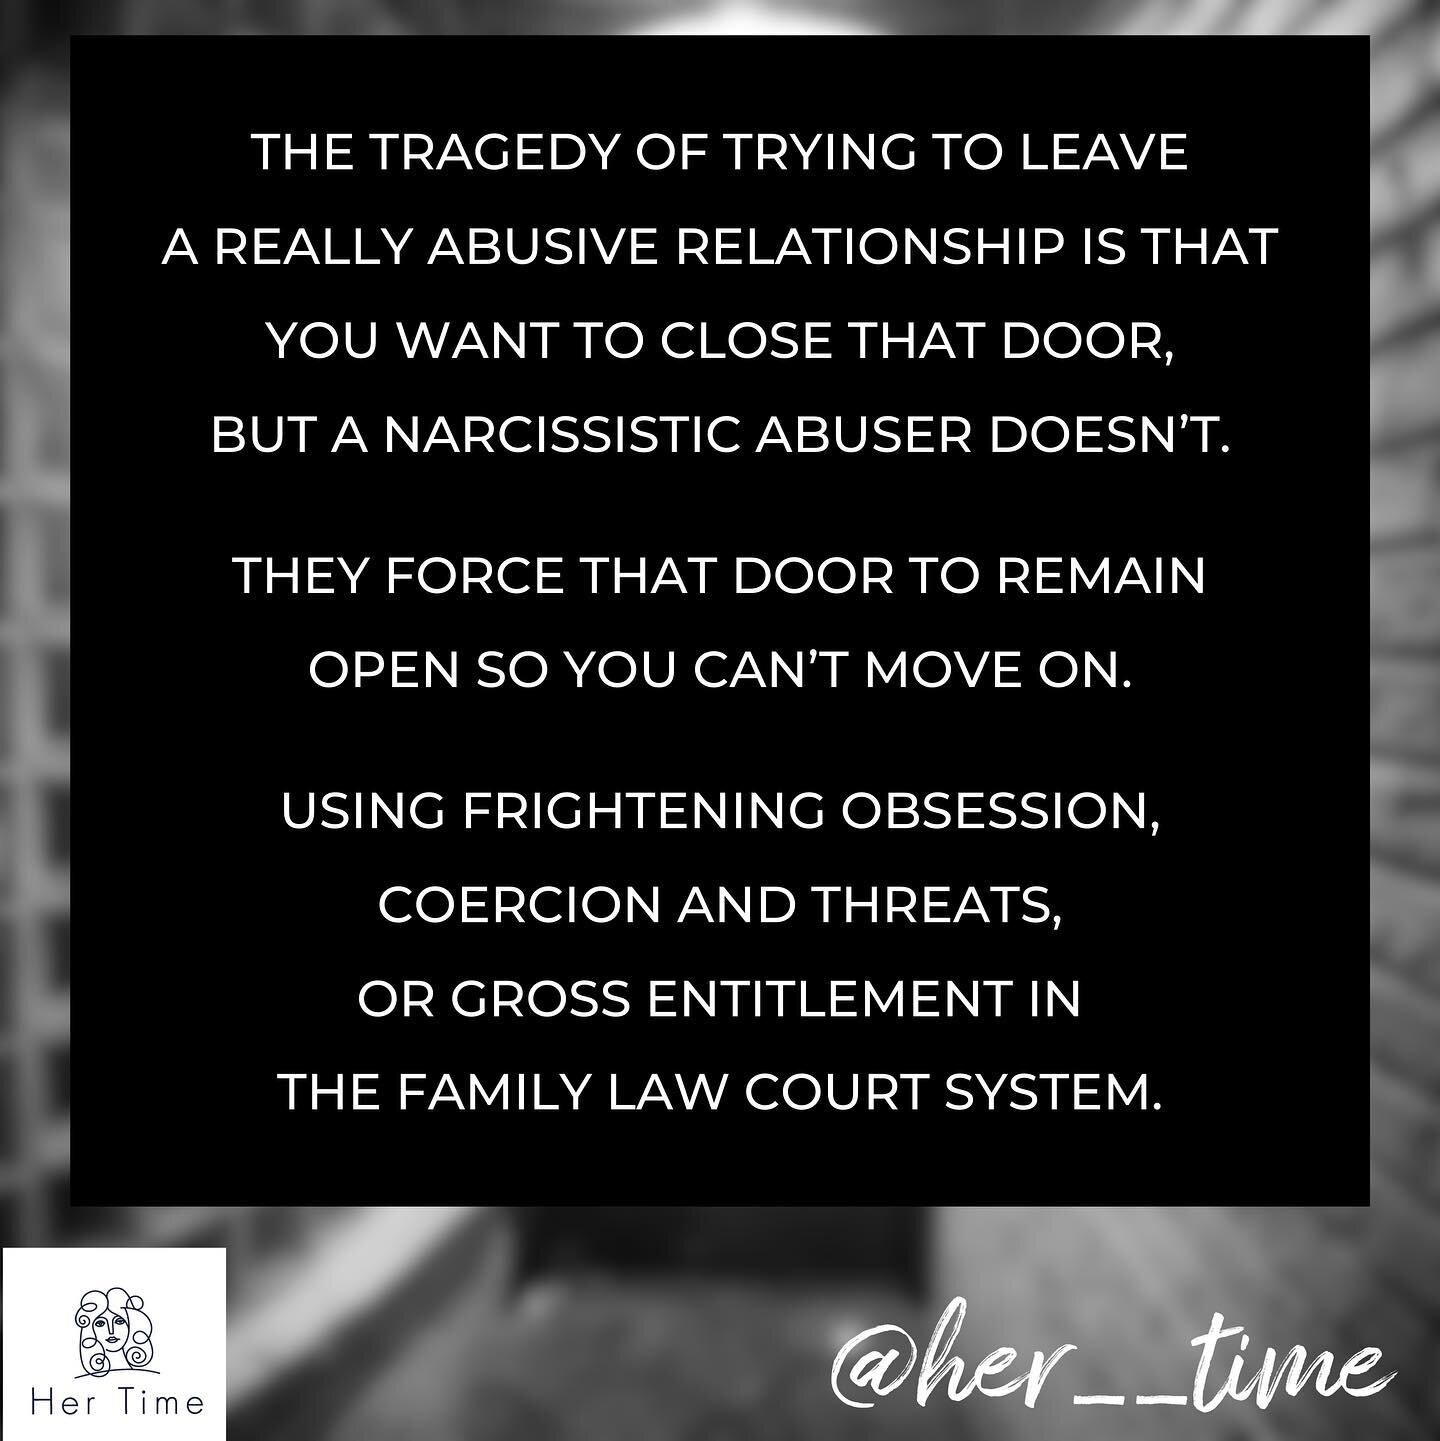 When one door closes, another one should open. Right? 

Wrong. In very entitled and emotionally needy abusive relationships, an abuser will refuse to allow you to close the door on them. 

They don&rsquo;t see it as your right to leave what is no lon